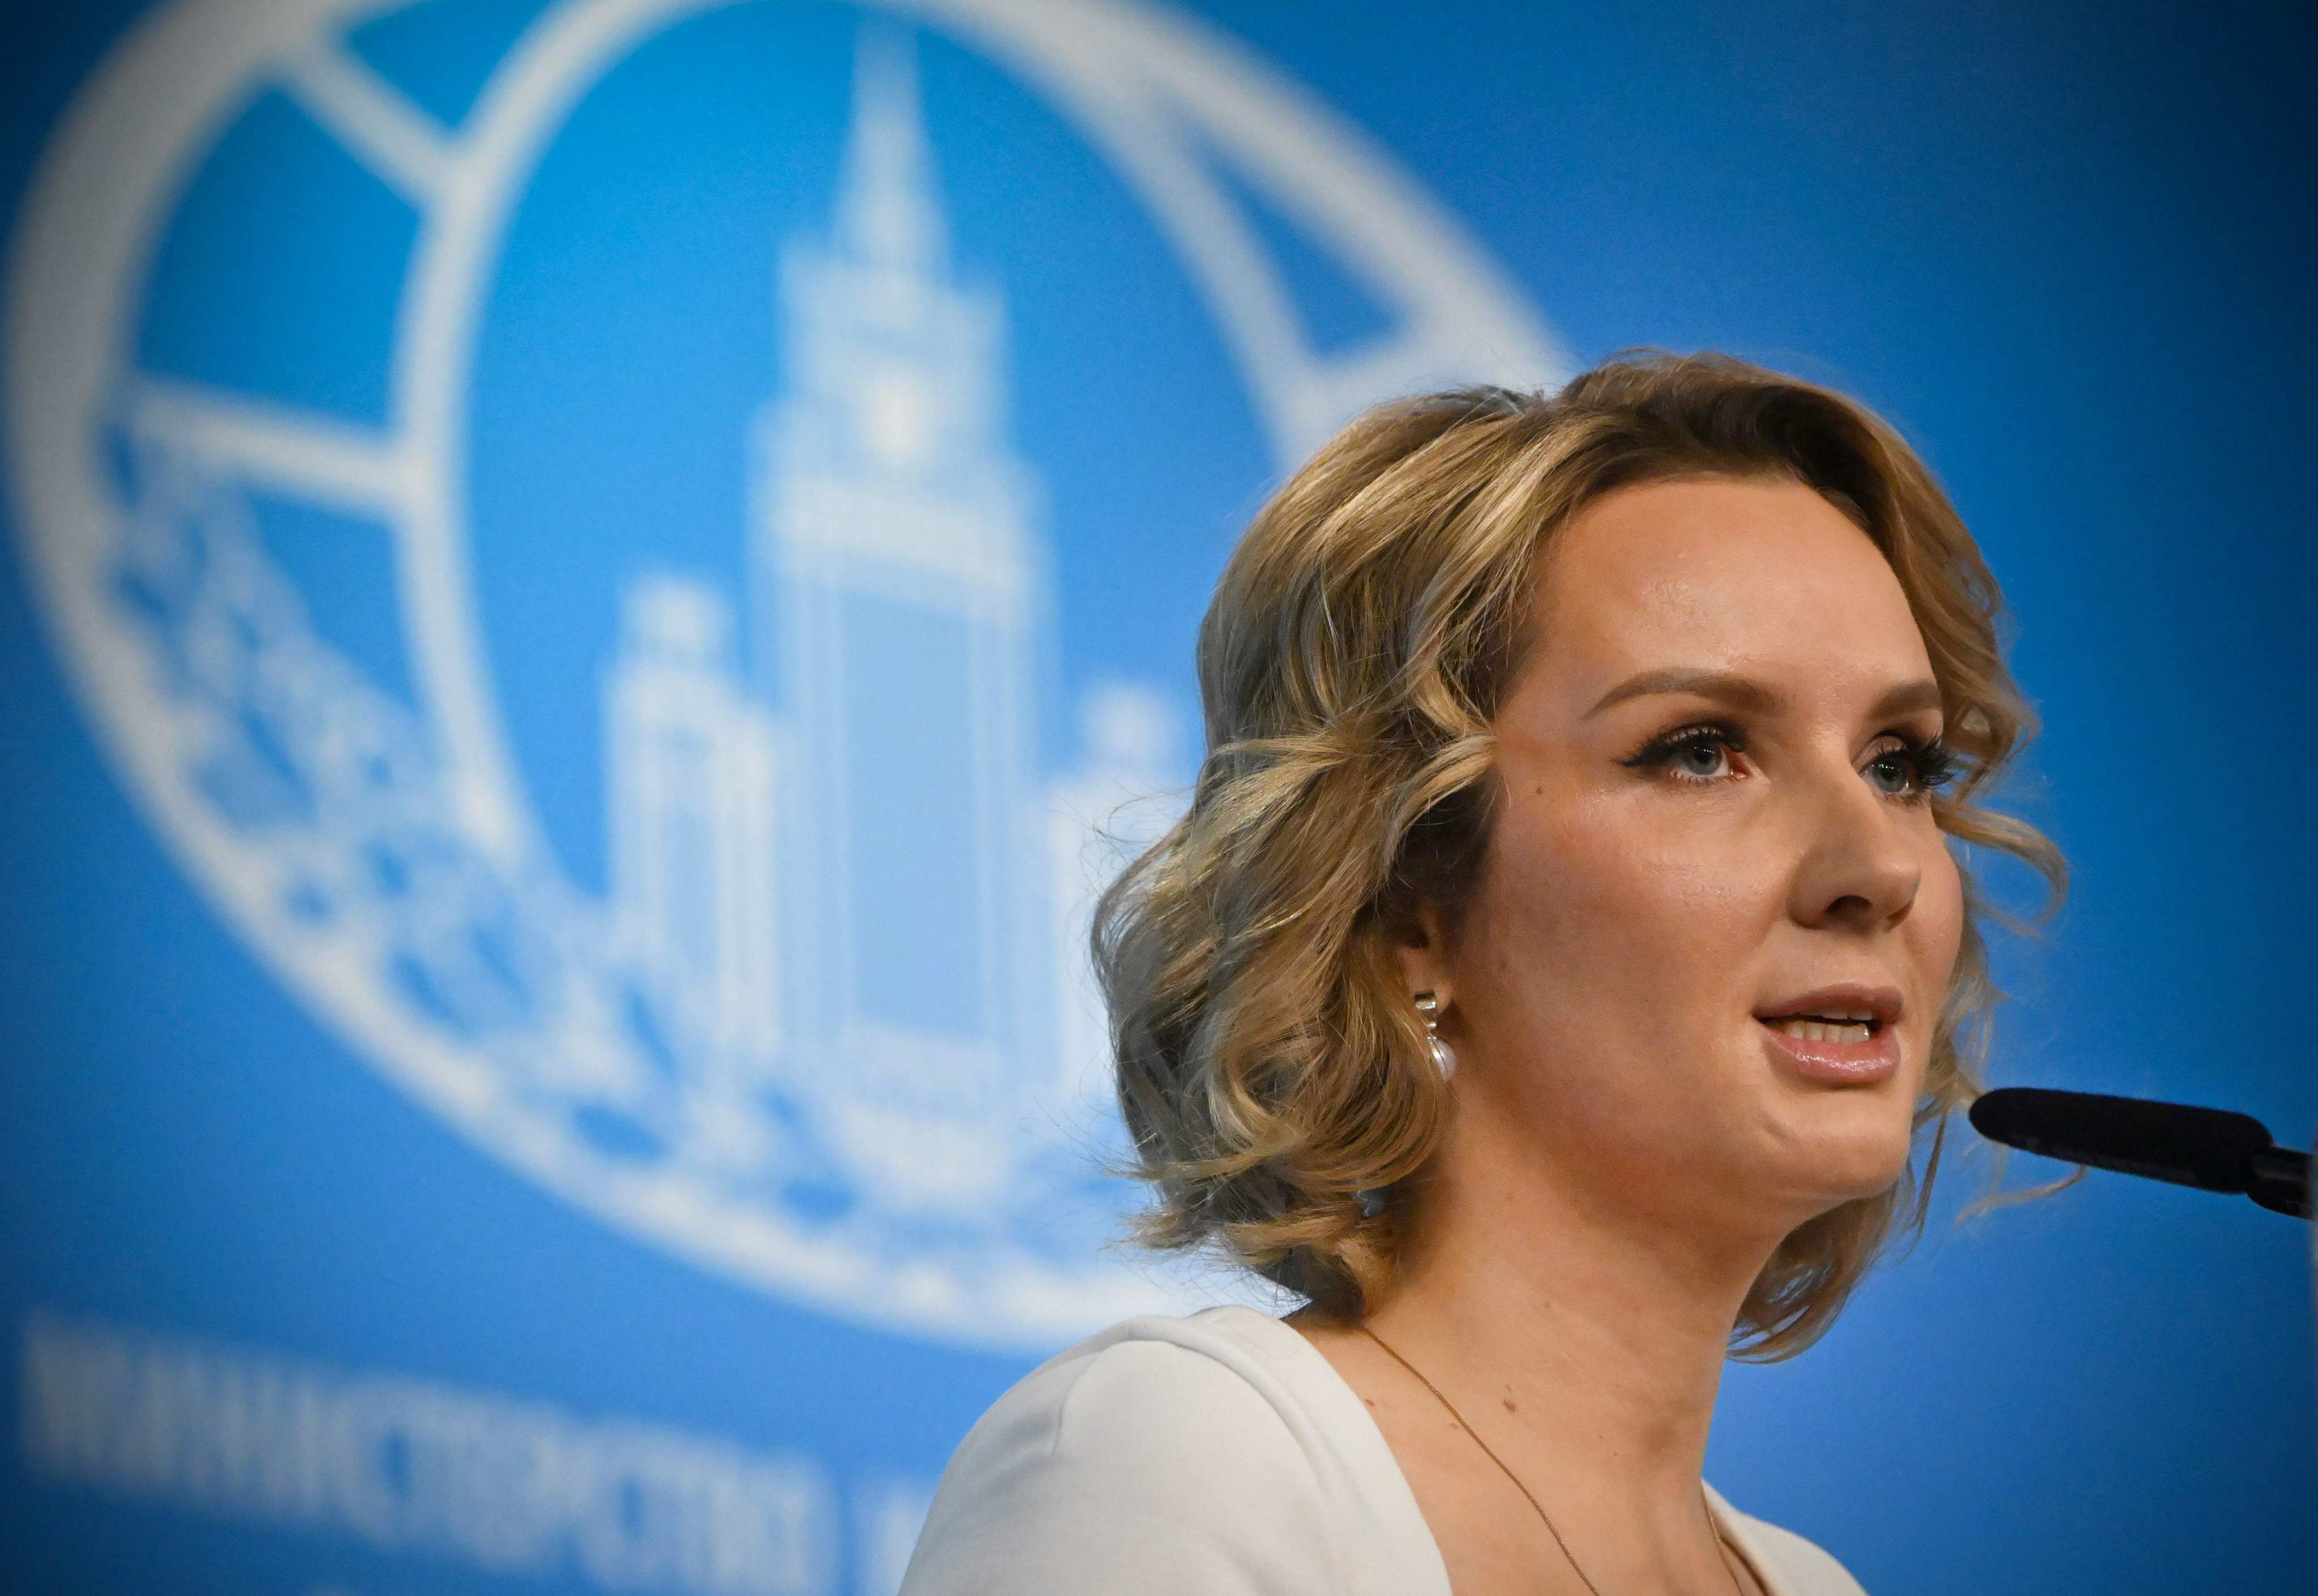 Russia’s Children’s Rights Commissioner Maria Lvova-Belova holds a press conference in Moscow on Tuesday. Photo: AFP